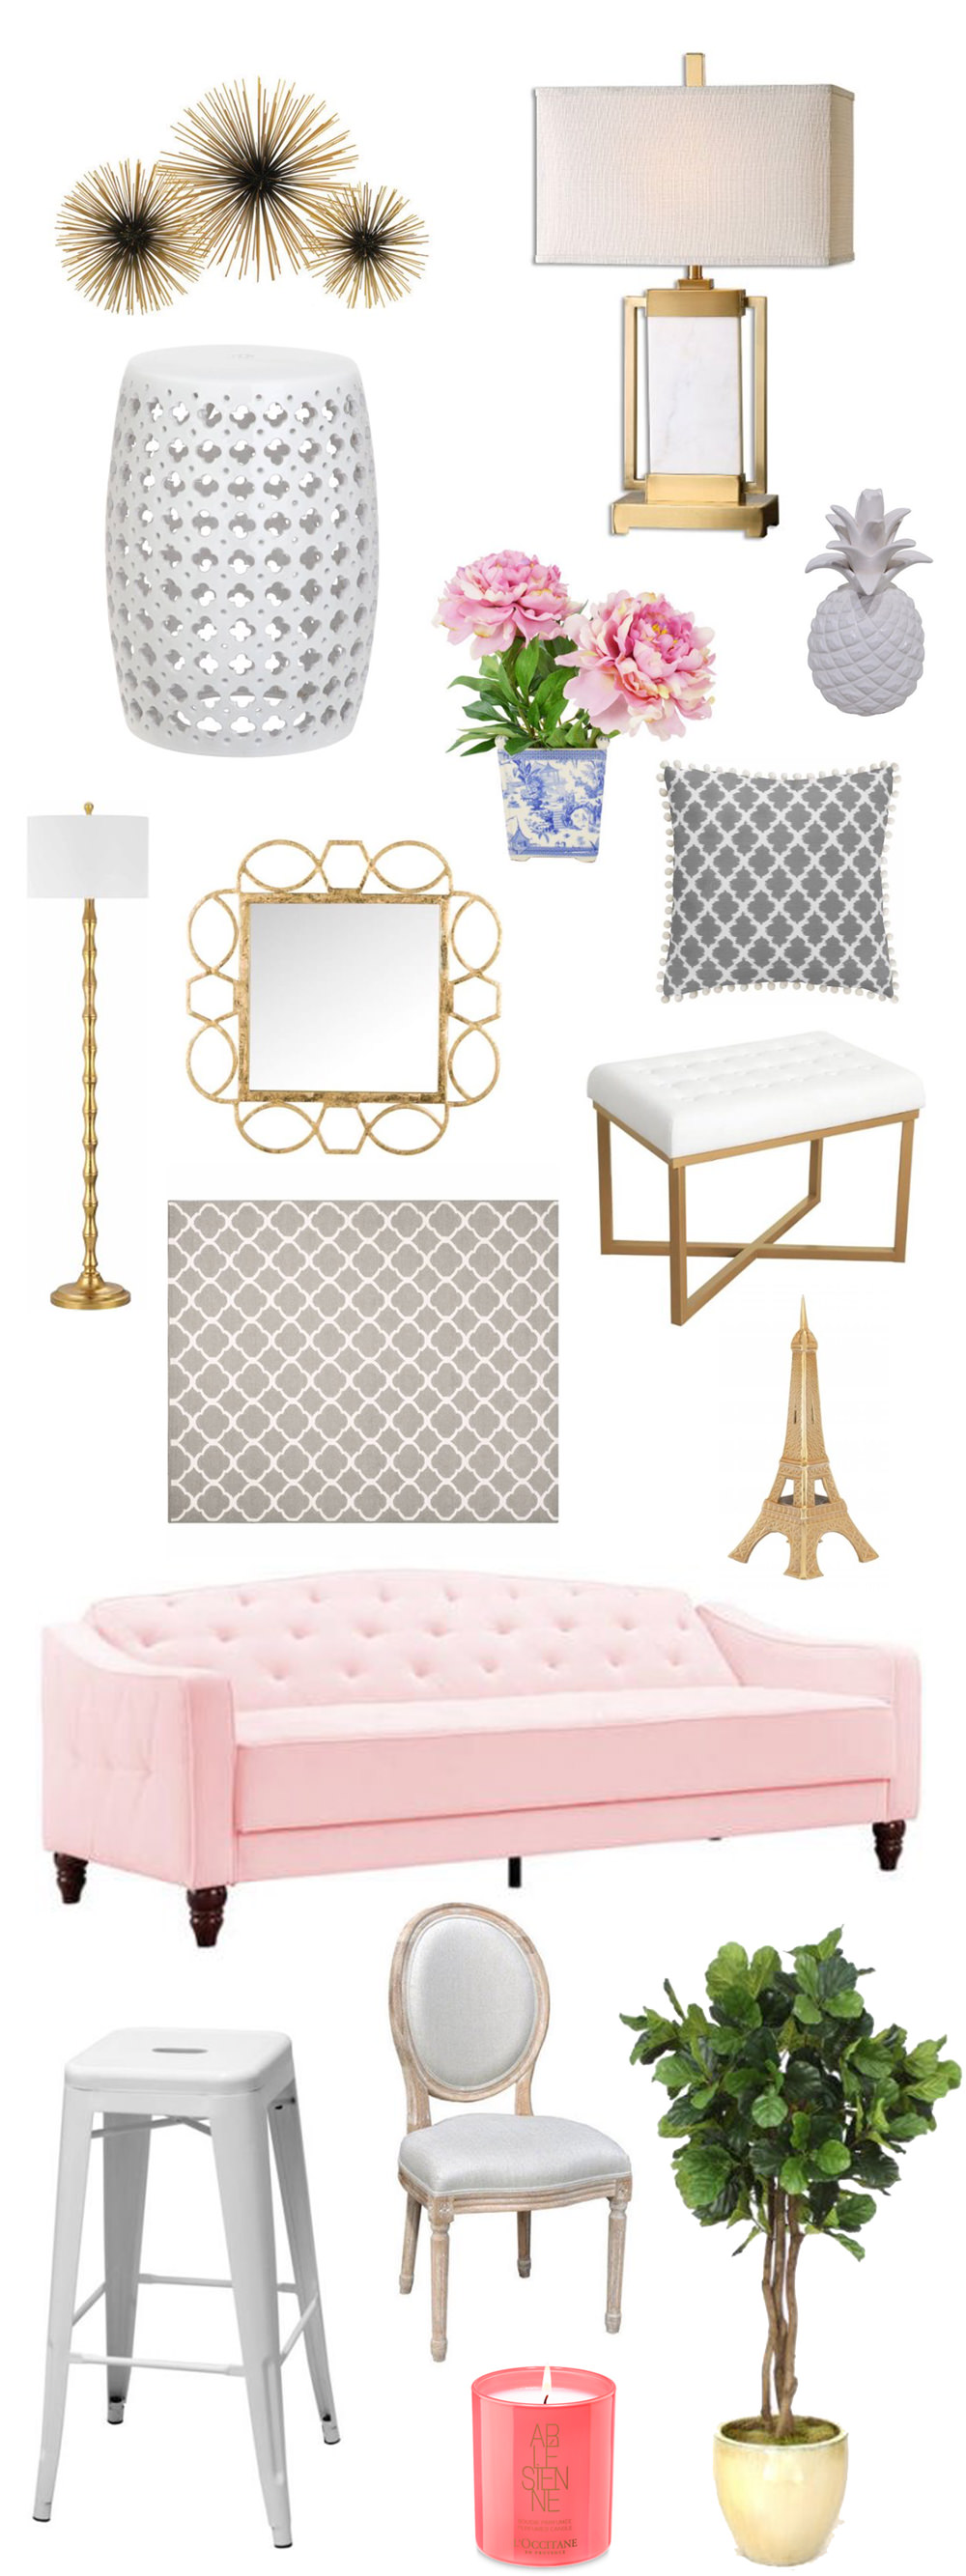 Dash of Darling shares her favorite furniture and decor items for Walmart while discussing how to decorate on a budget.